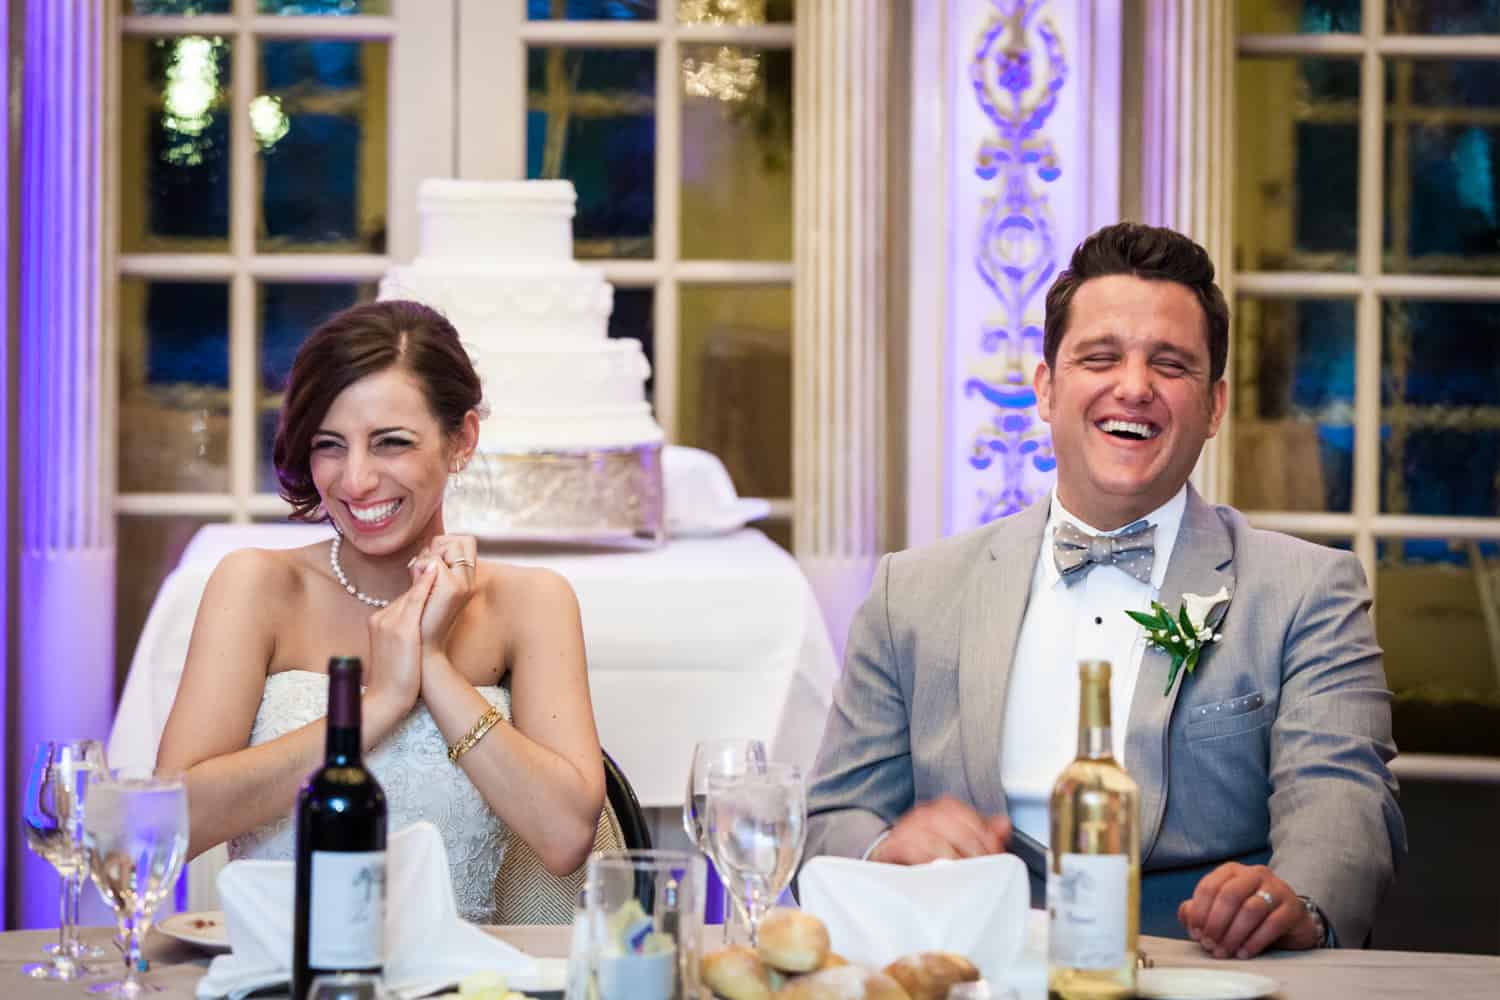 Bride and groom at sweetheart table laughing during speeches